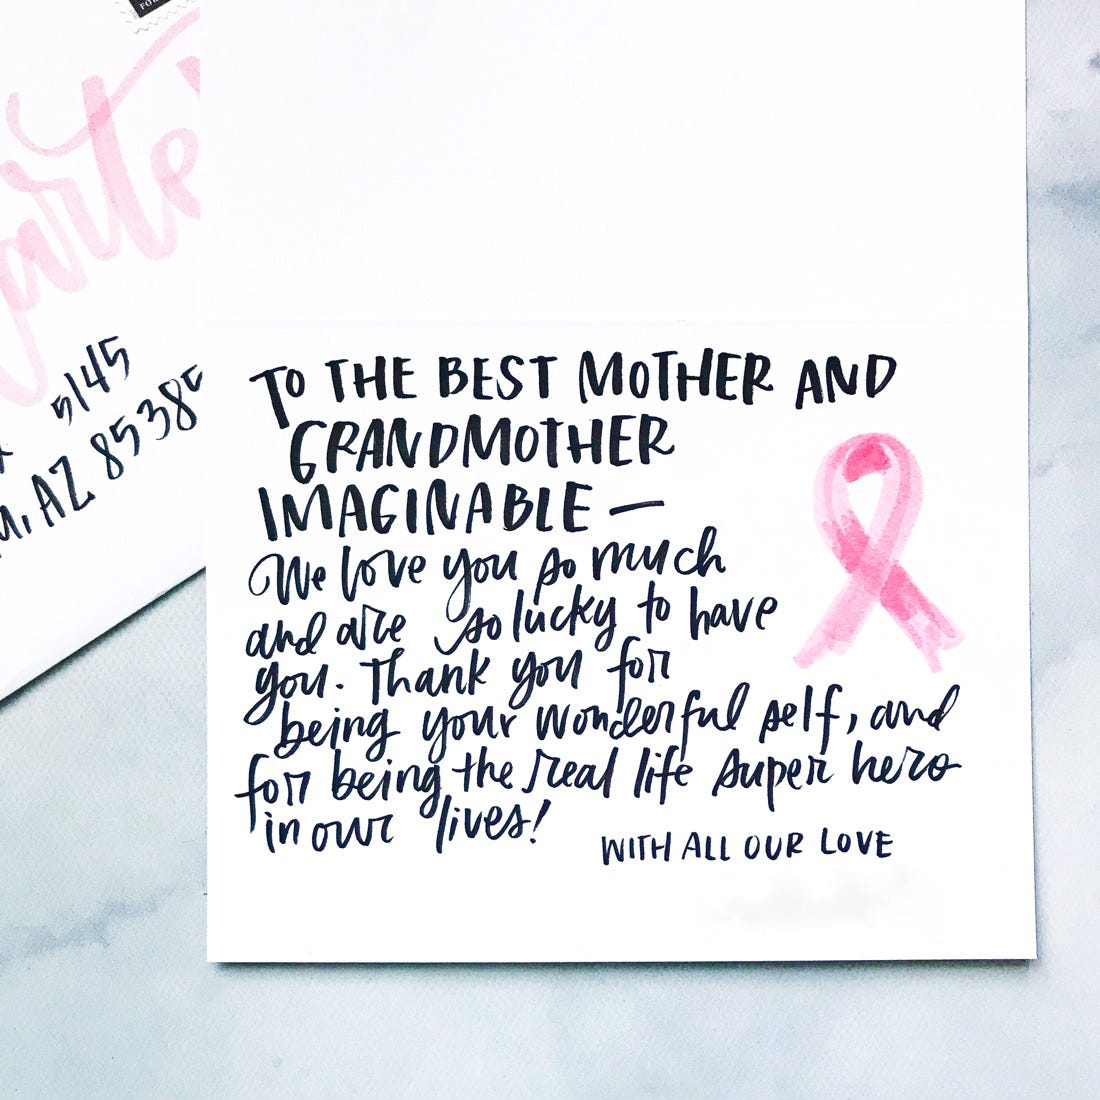 what-to-write-in-your-mother-s-day-card-punkpost-medium